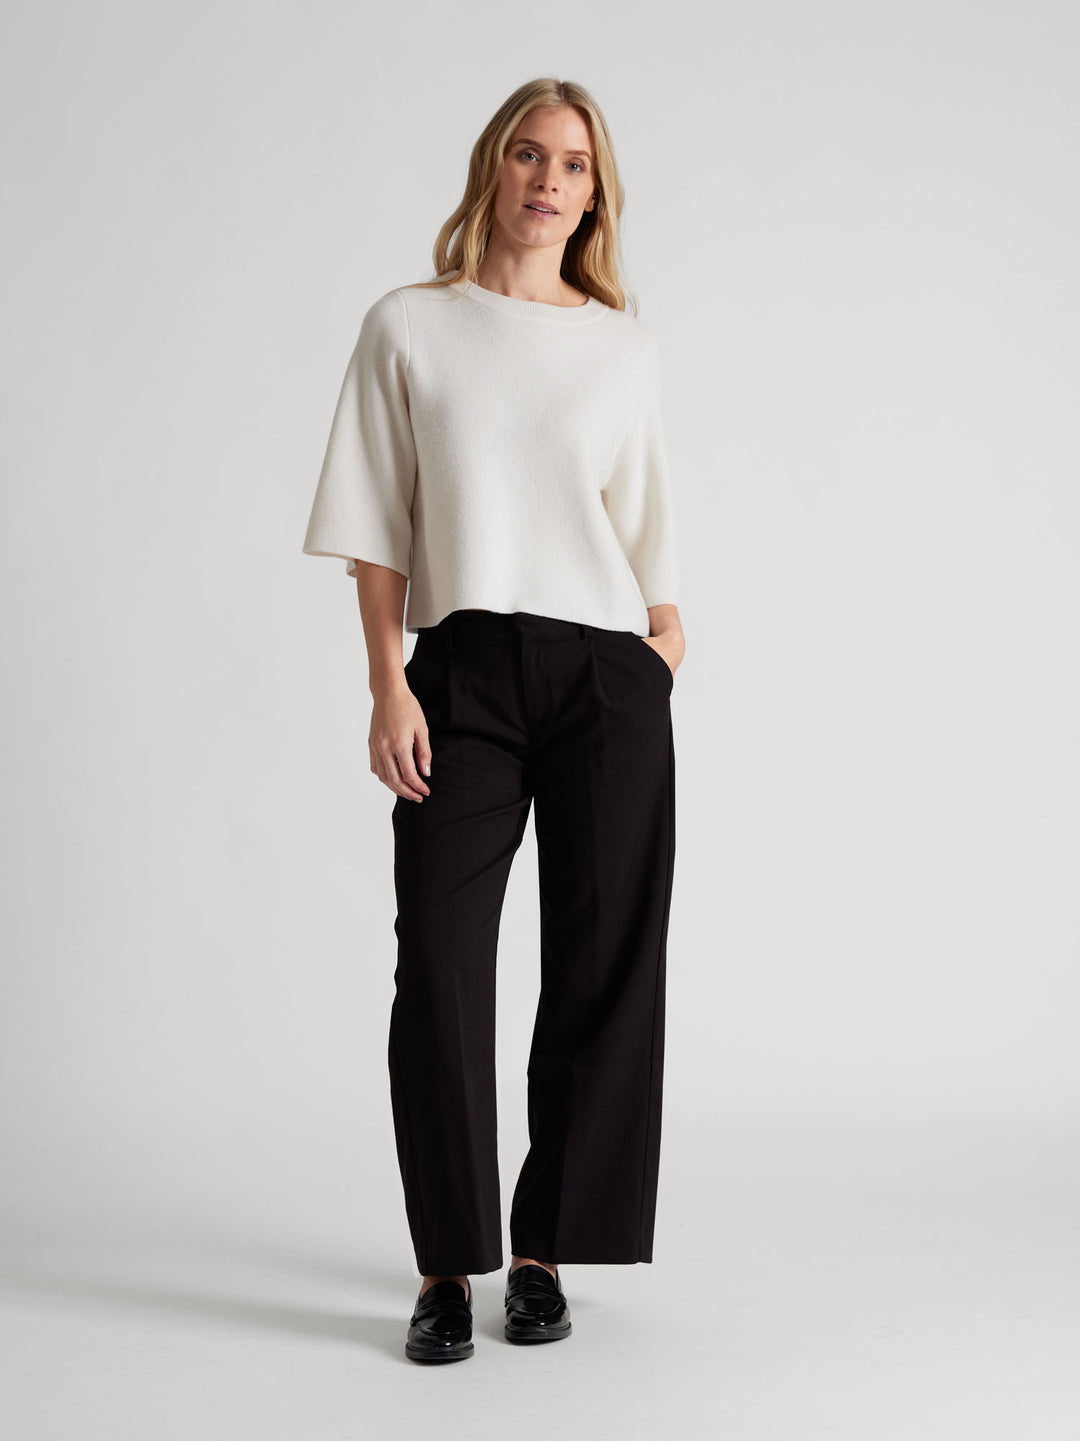 Cashmere sweater "Dina" in 100% pure cashmere. Scandinavian design by Kashmina. Color: White.